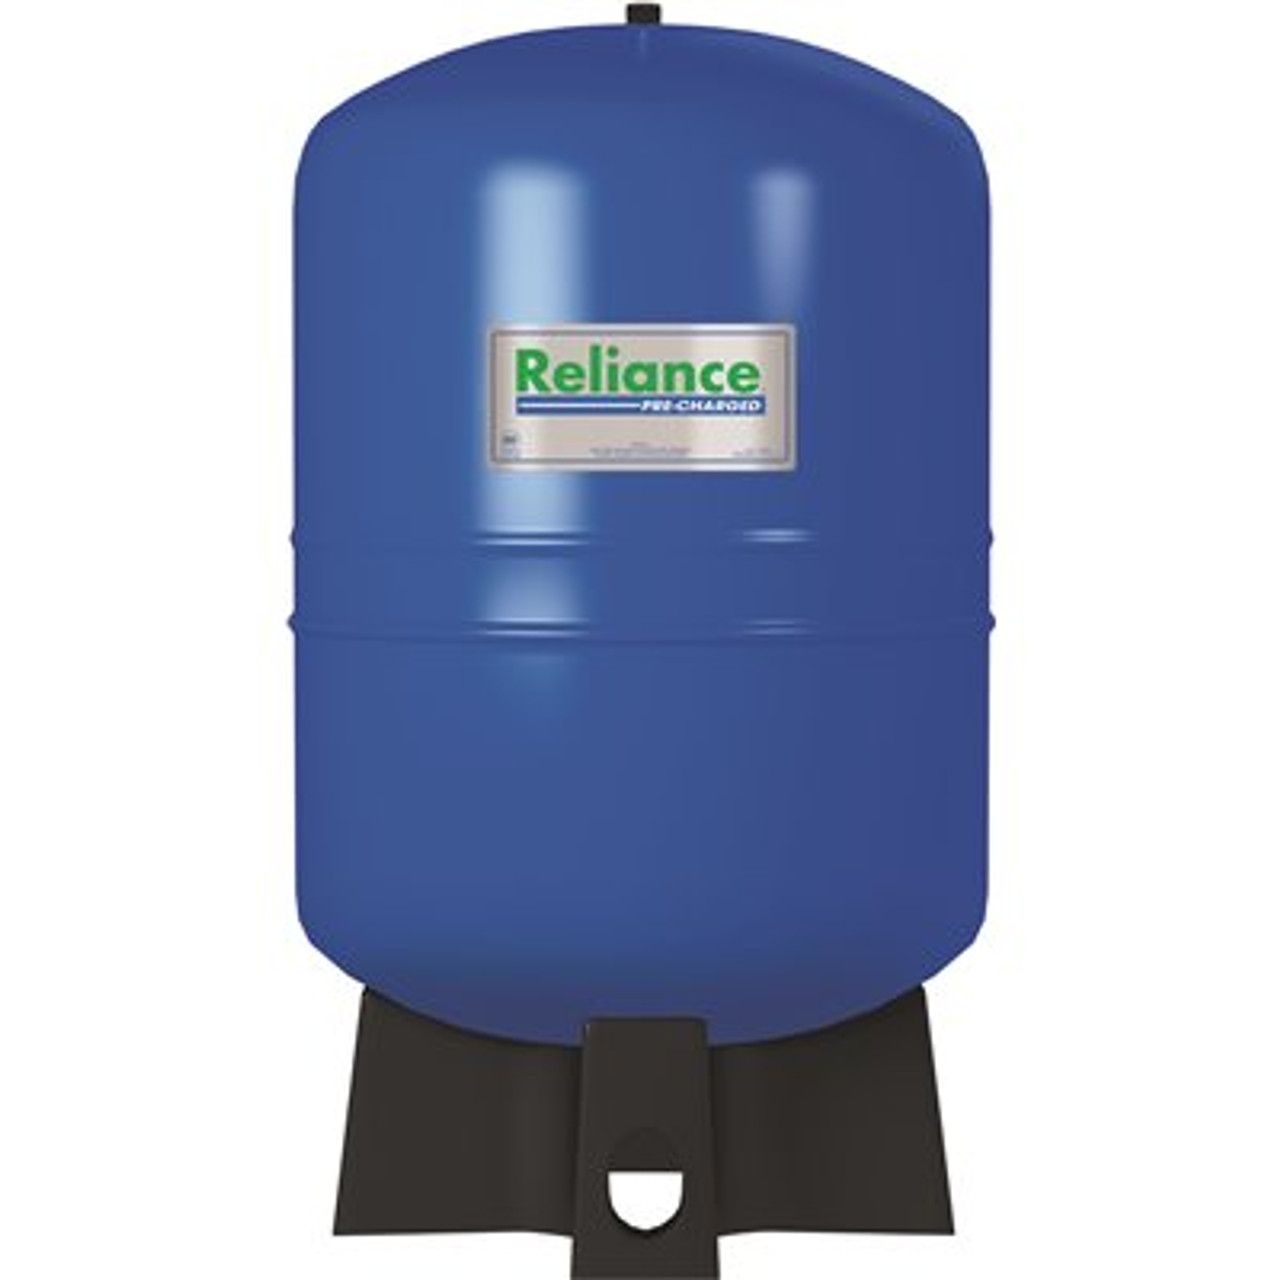 Reliance 52 Gal. Free-Standing Well/Pressure Tank